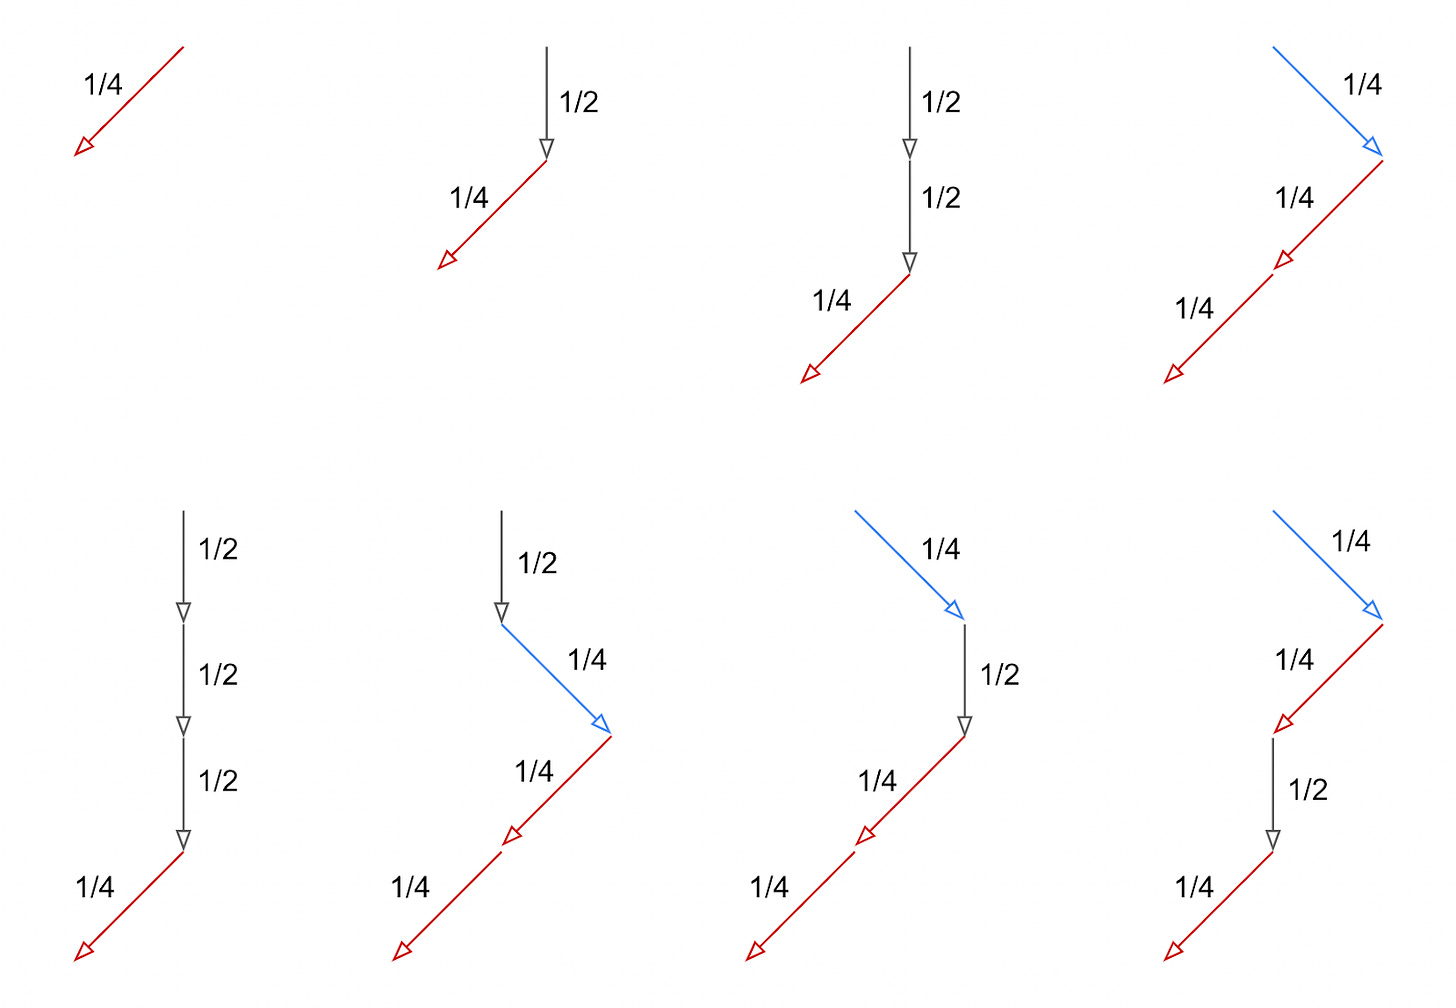 The eight paths that result in D(N) = -1 are shown. The first path is a down-left arrow. The second path is down, down-left. The third is down, down, down-left. The fourth is down-right, down-left, down-left. The fifth is down, down, down, down-left. The sixth is down, down-right, down-left, down-left. The seventh is down-right, down, down-left, down-left. The eighth is down-right, down-left, down, down-left.